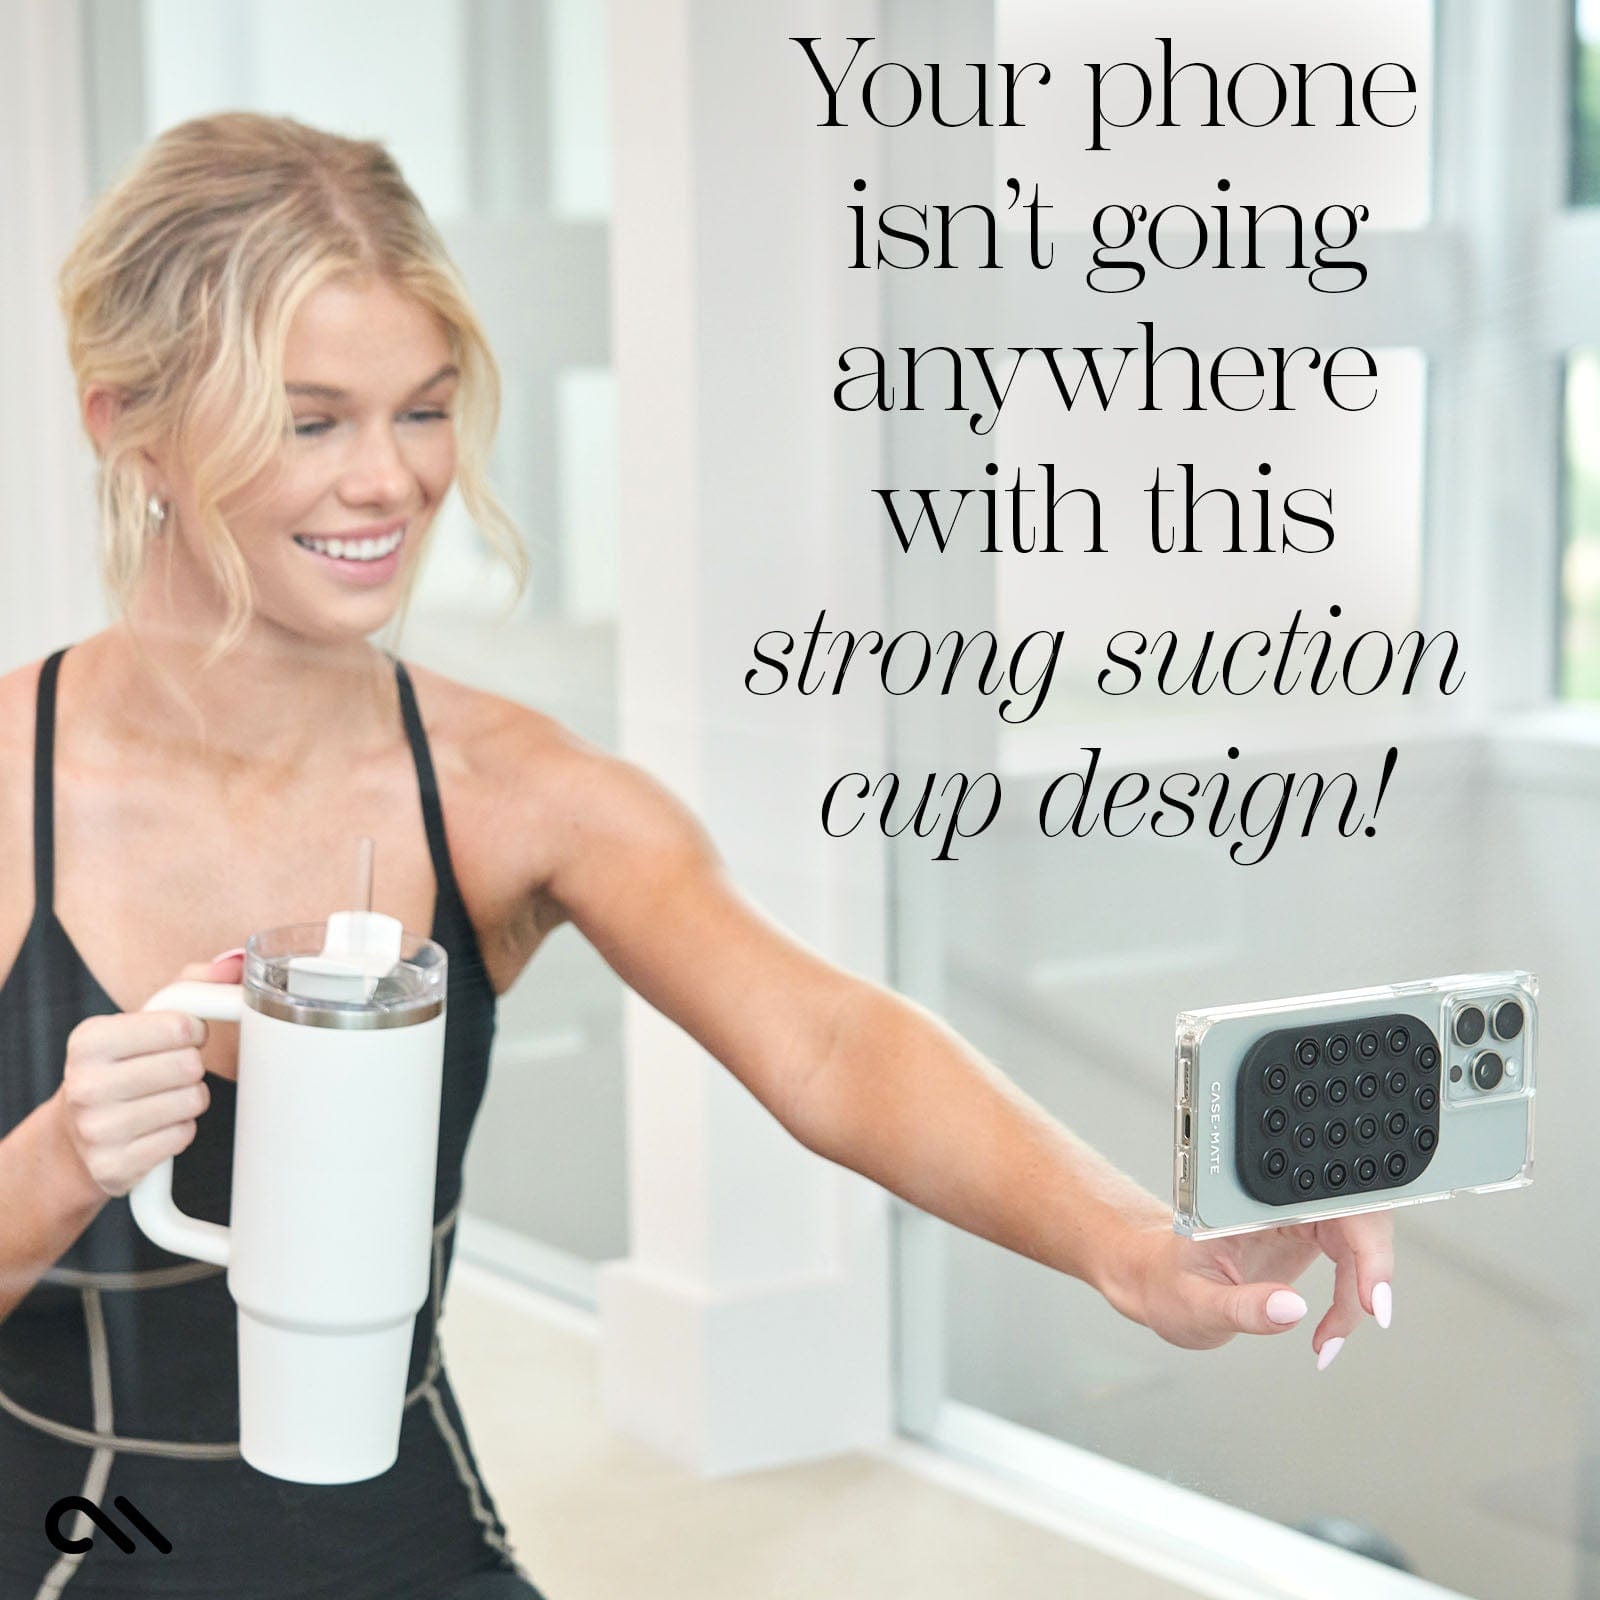 YOUR PHONE ISN'T GOING ANYWHERE WITH THIS STRONG SUCTION CUP DESIGN'